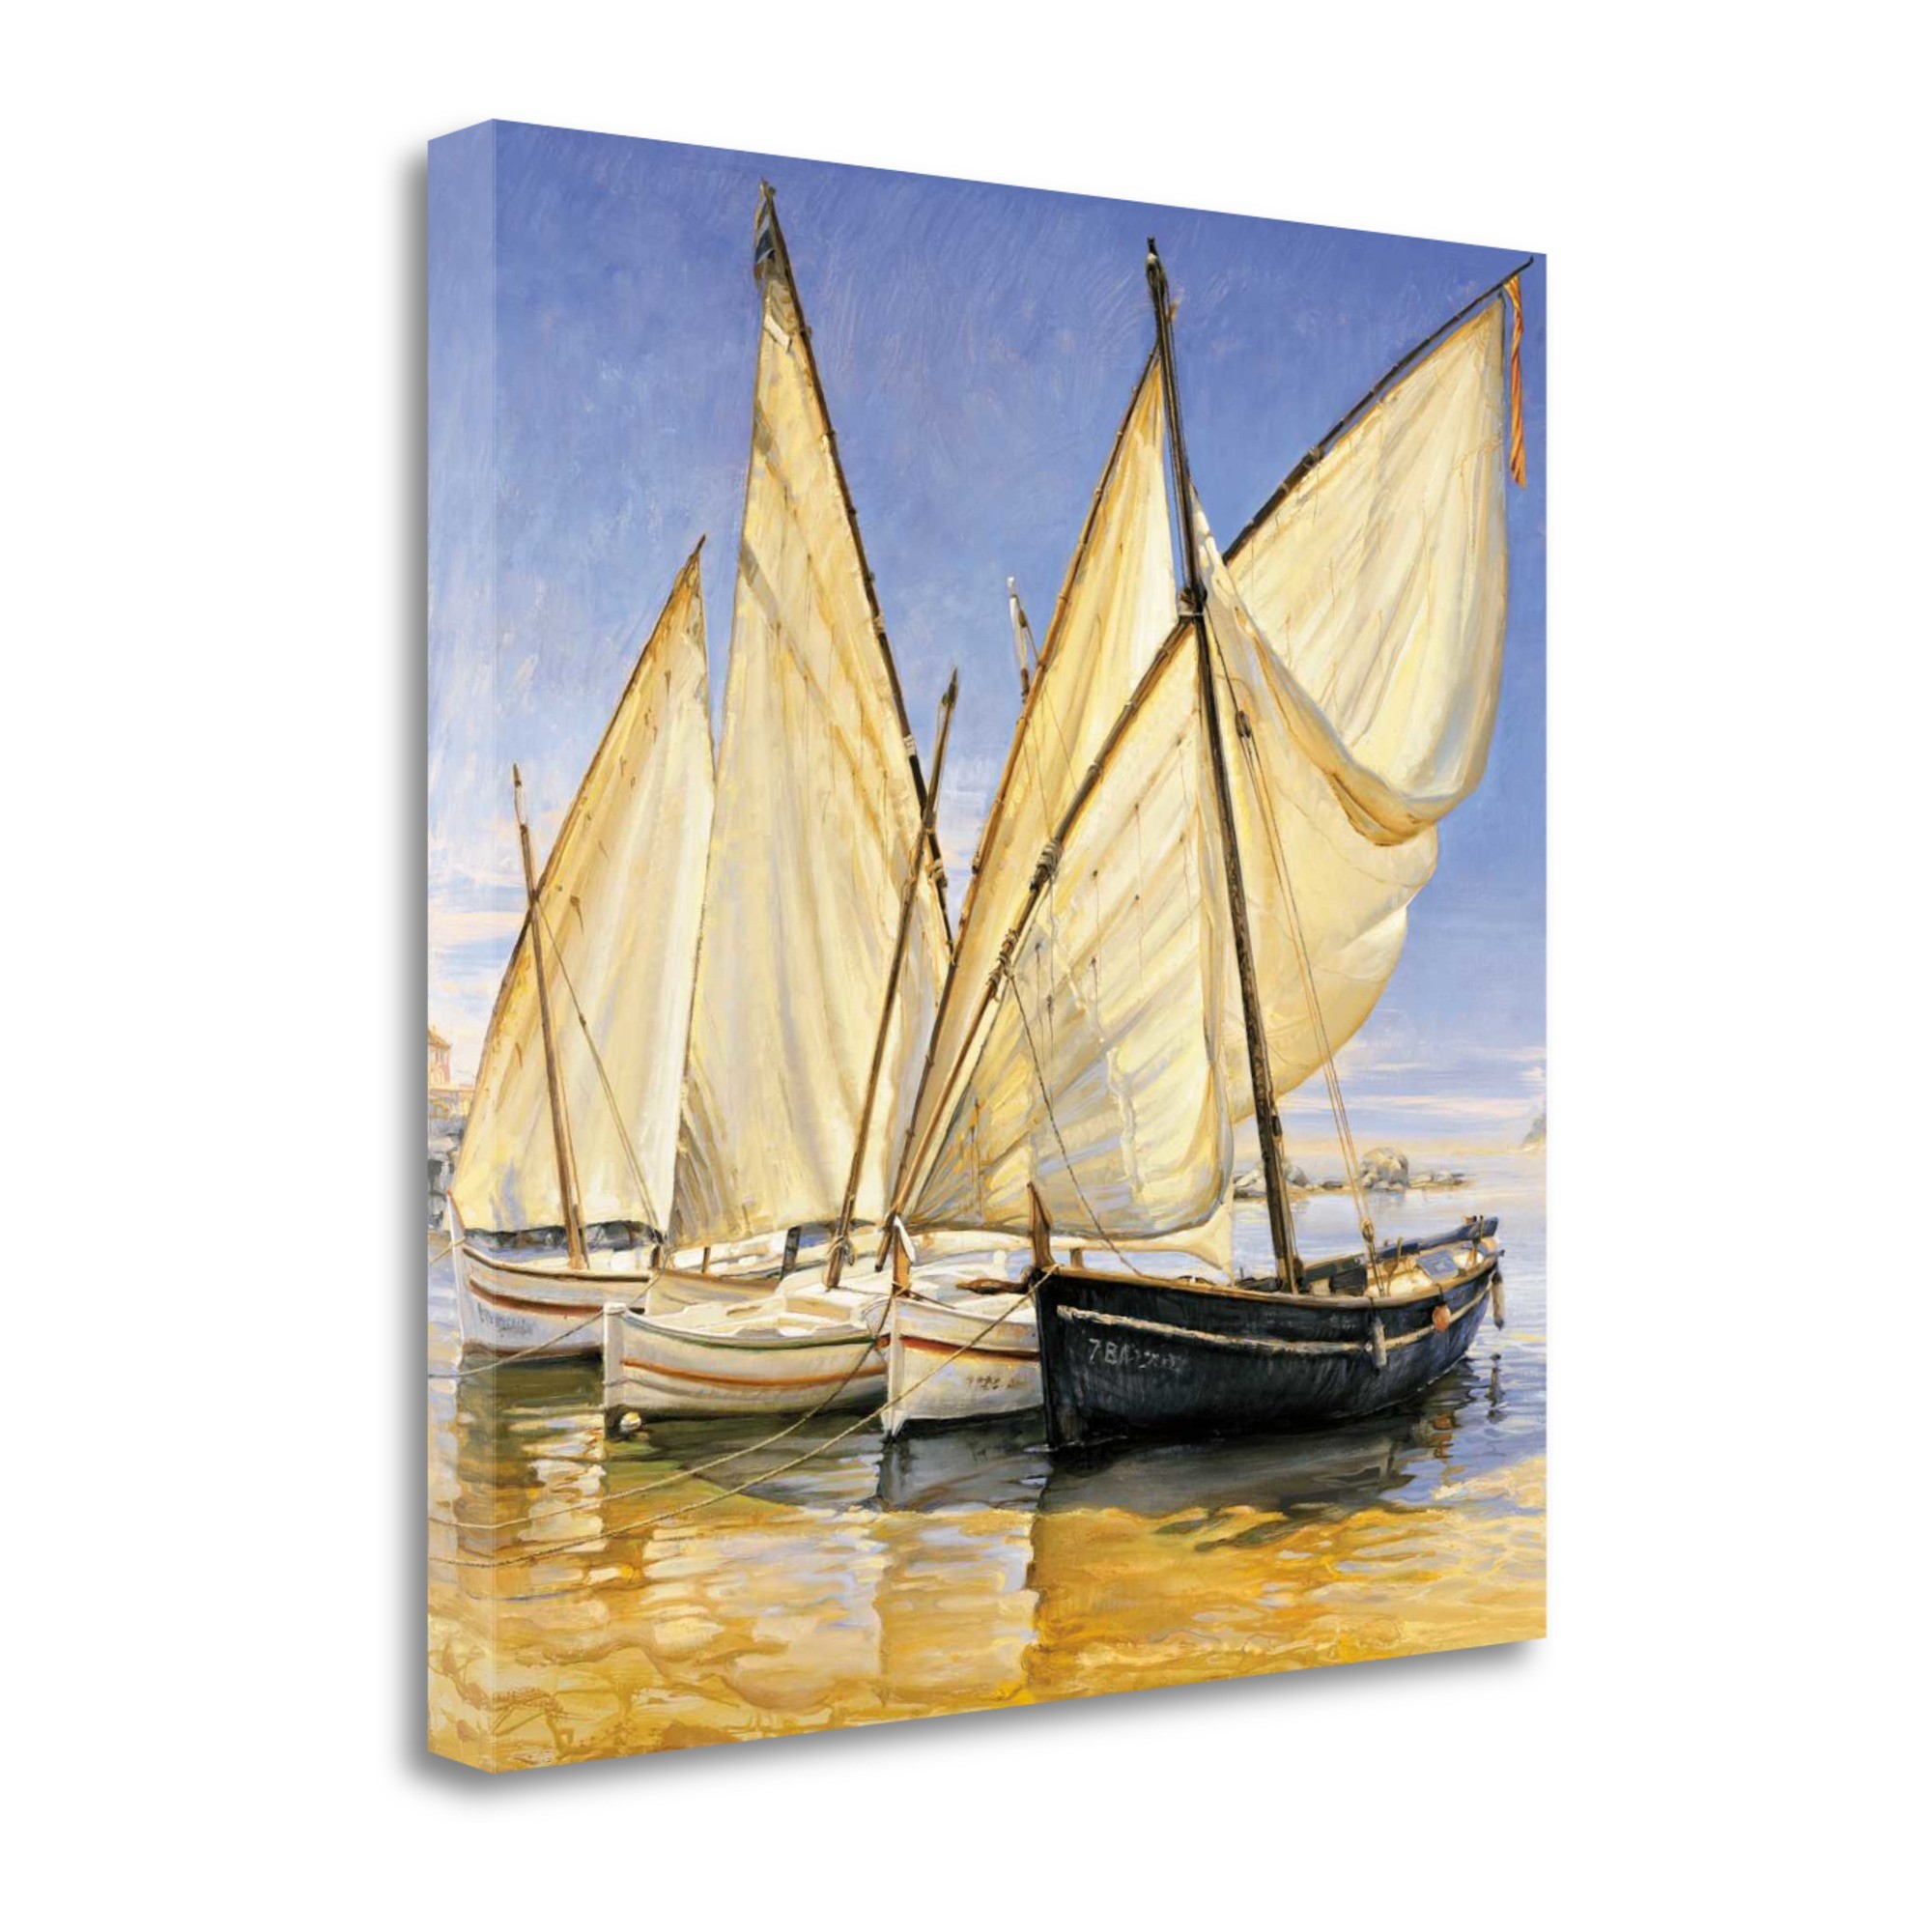 35" Fleet of Boats with Royal White Sails Giclee Wrap Canvas Wall Art